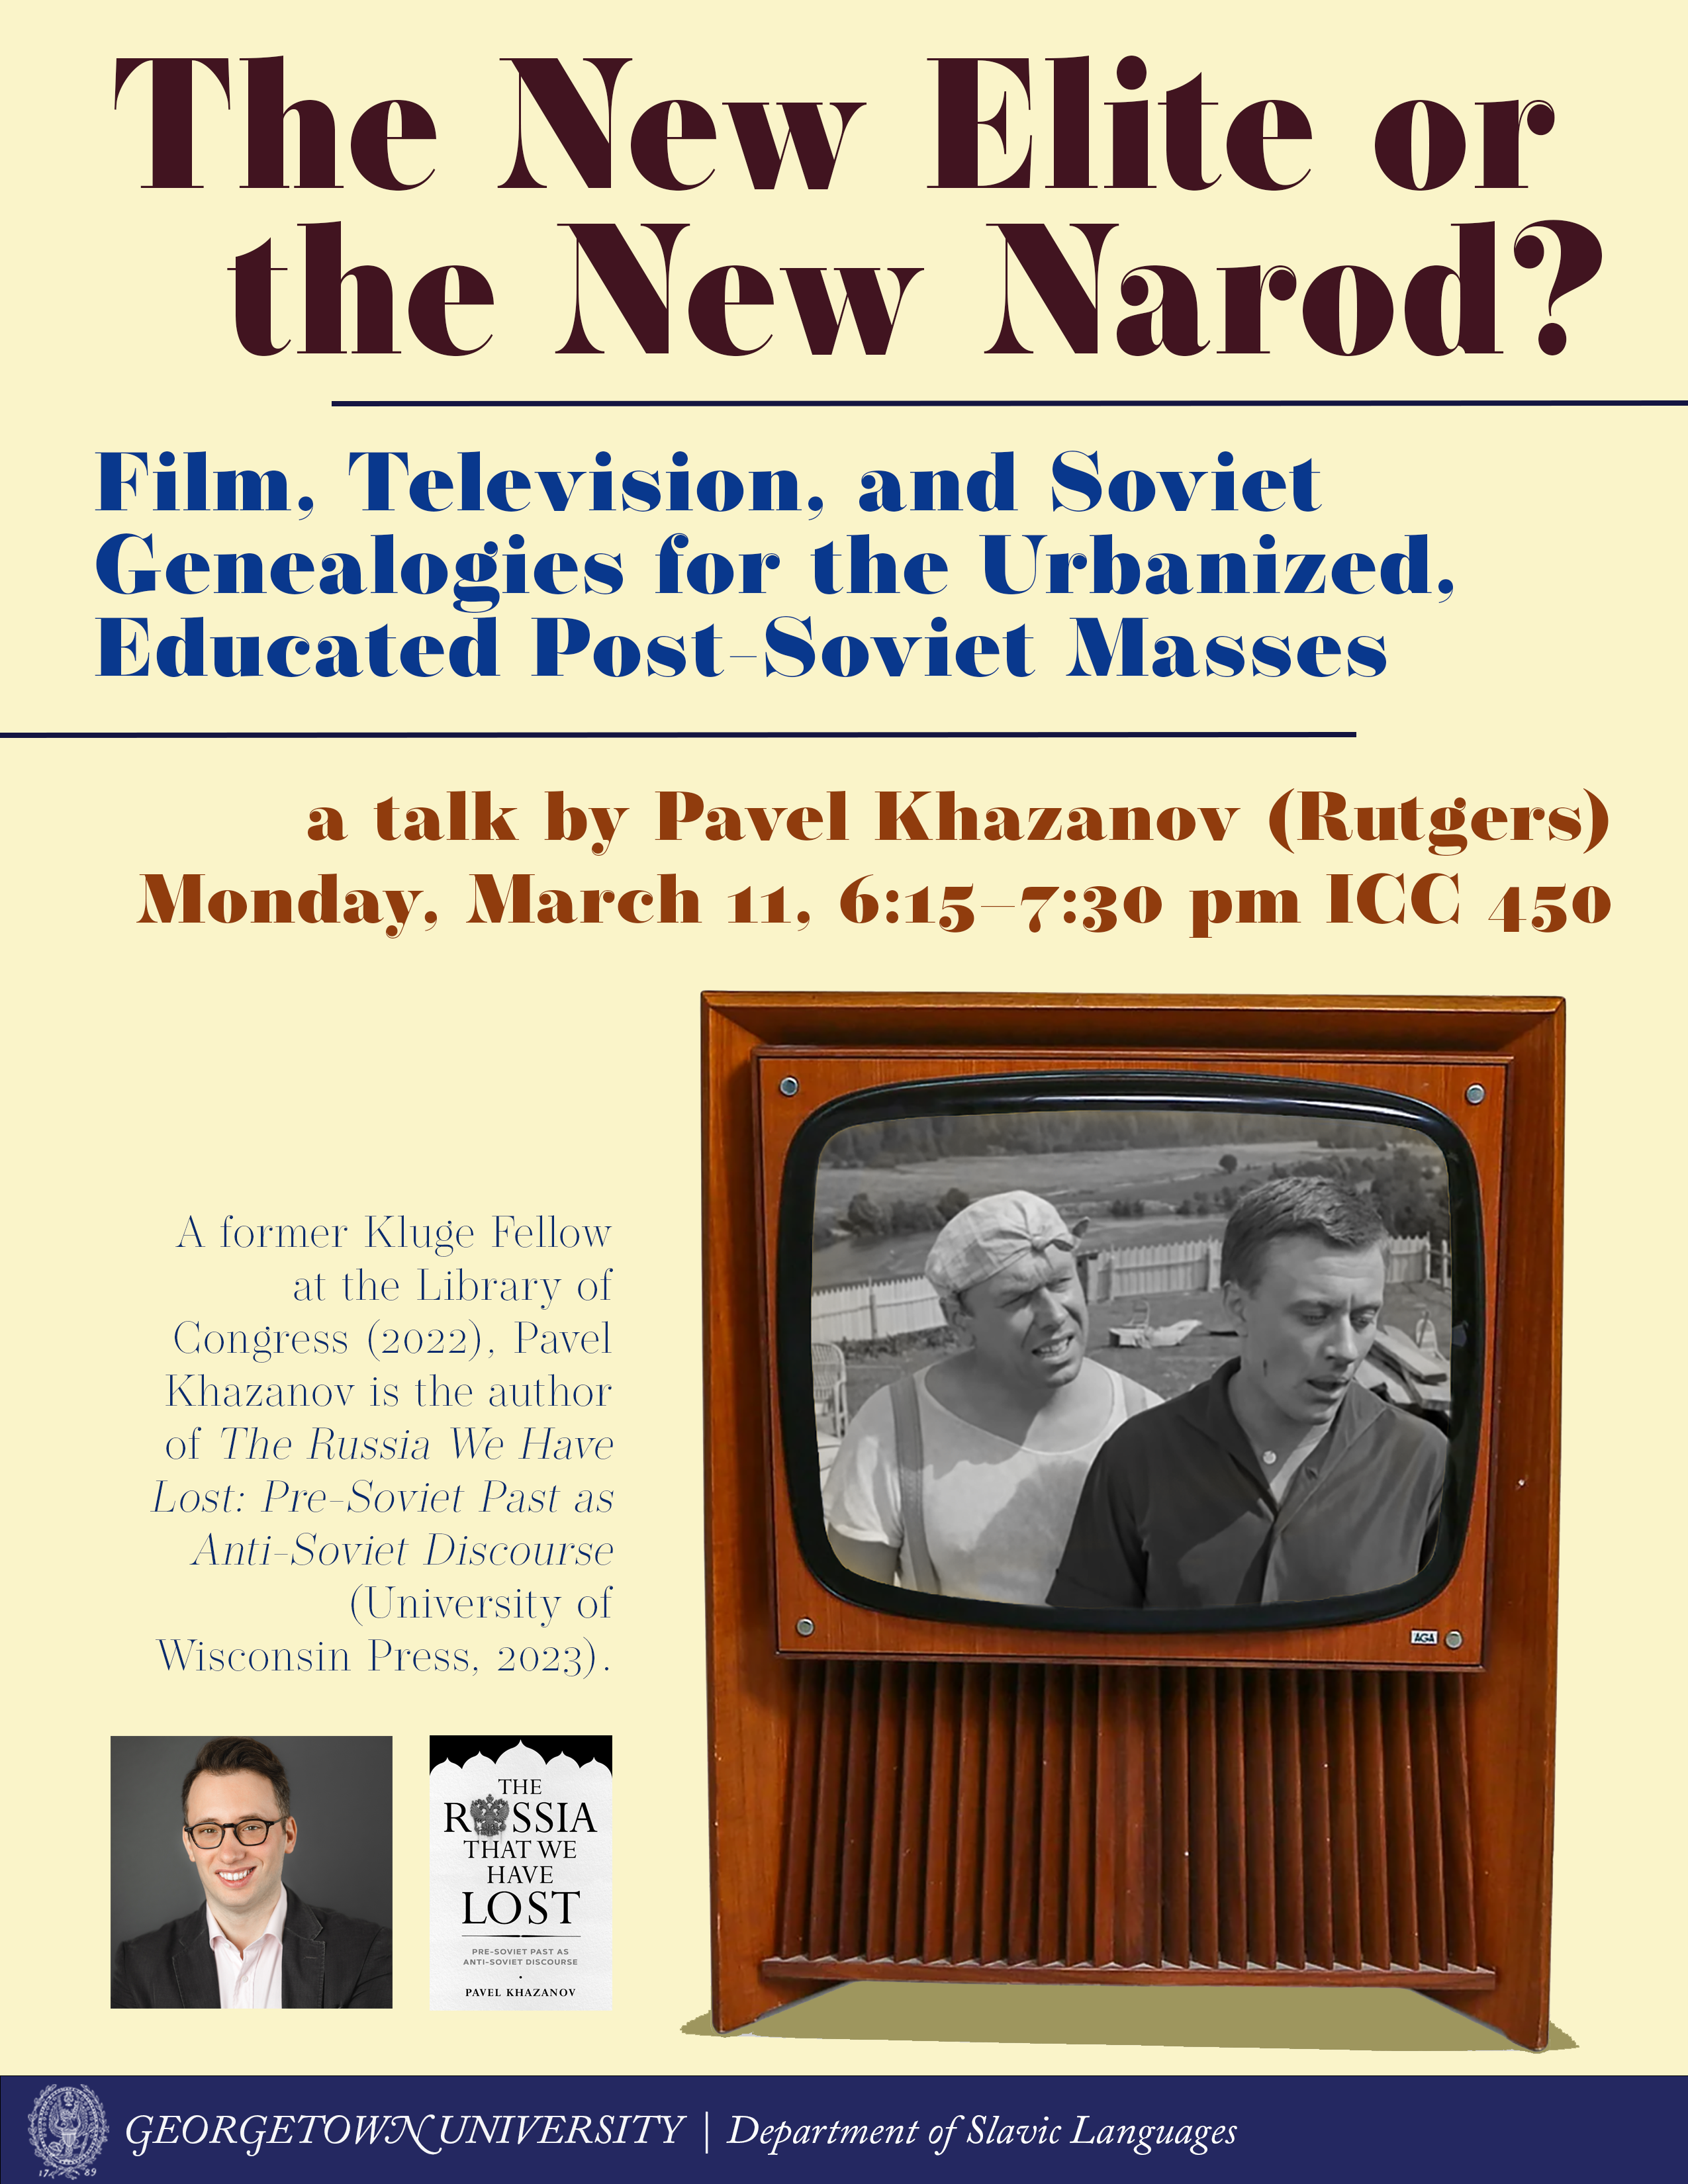 The New Elite or the New Narod? Film, Television, and Soviet Genealogies for the Urbanized, Educated Post-Soviet Masses. Talk by Pavel Khazanov (Rutgers) poster